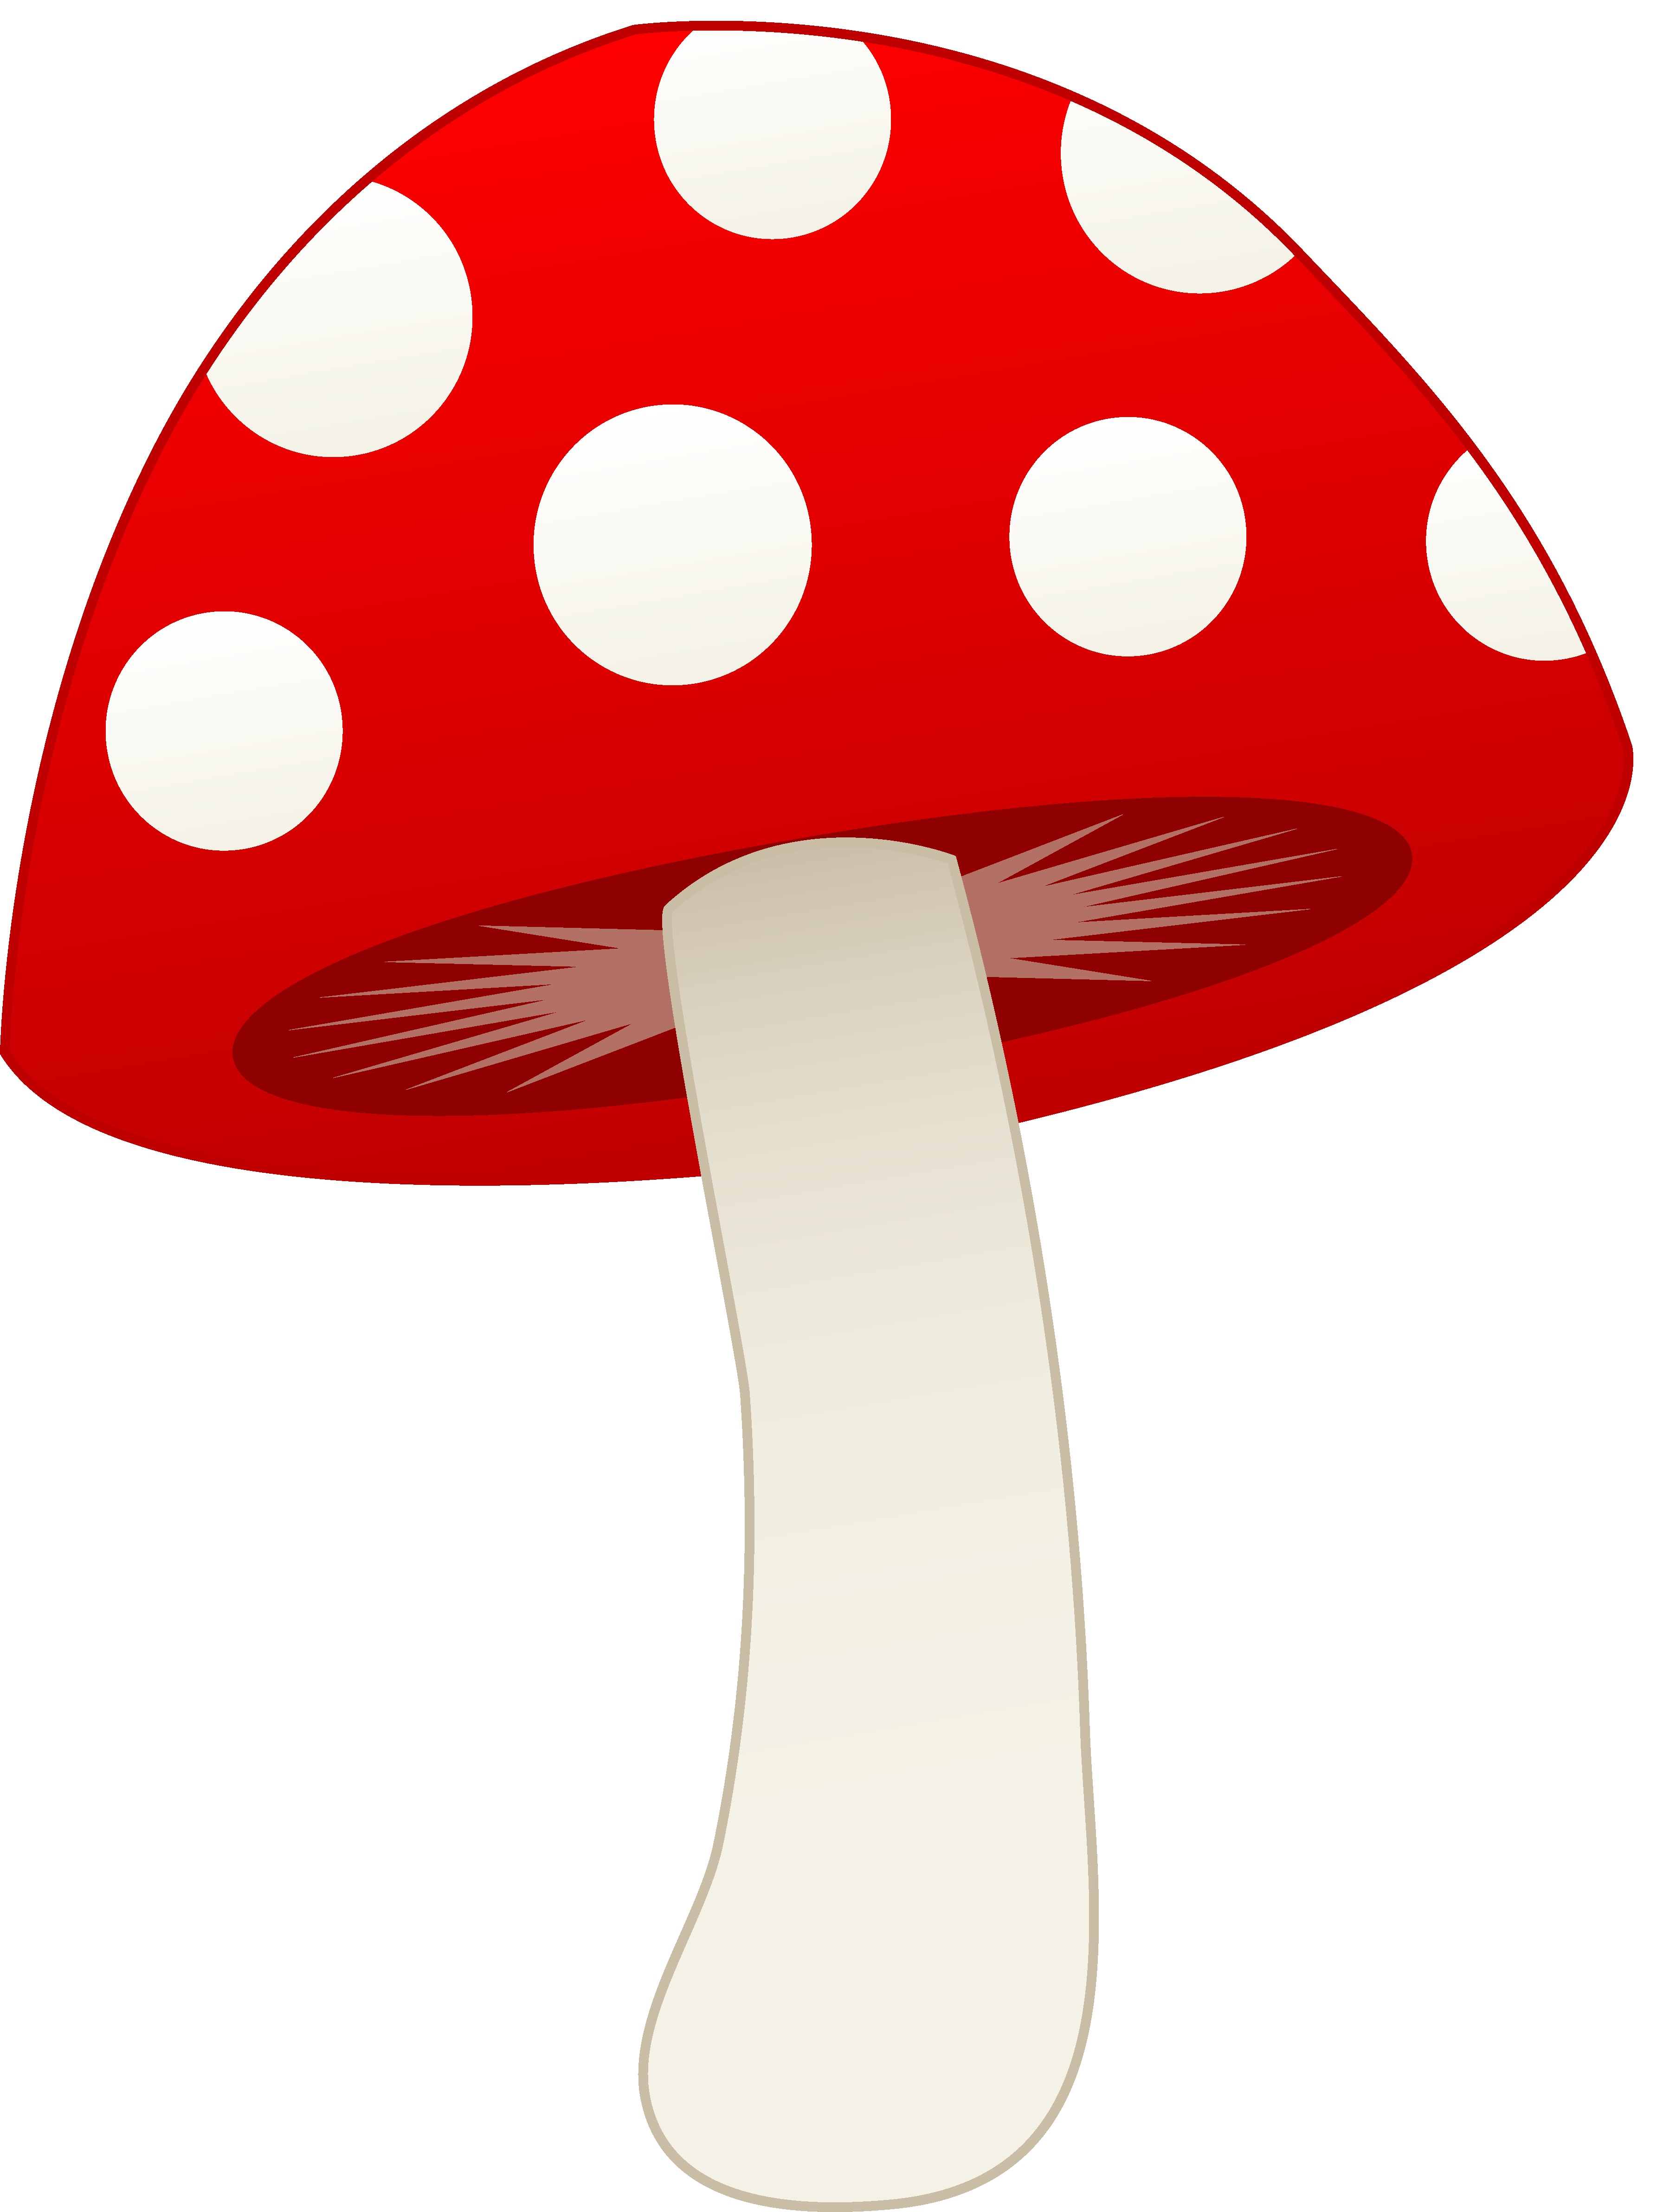 Images For > Cute Mushroom Clipart